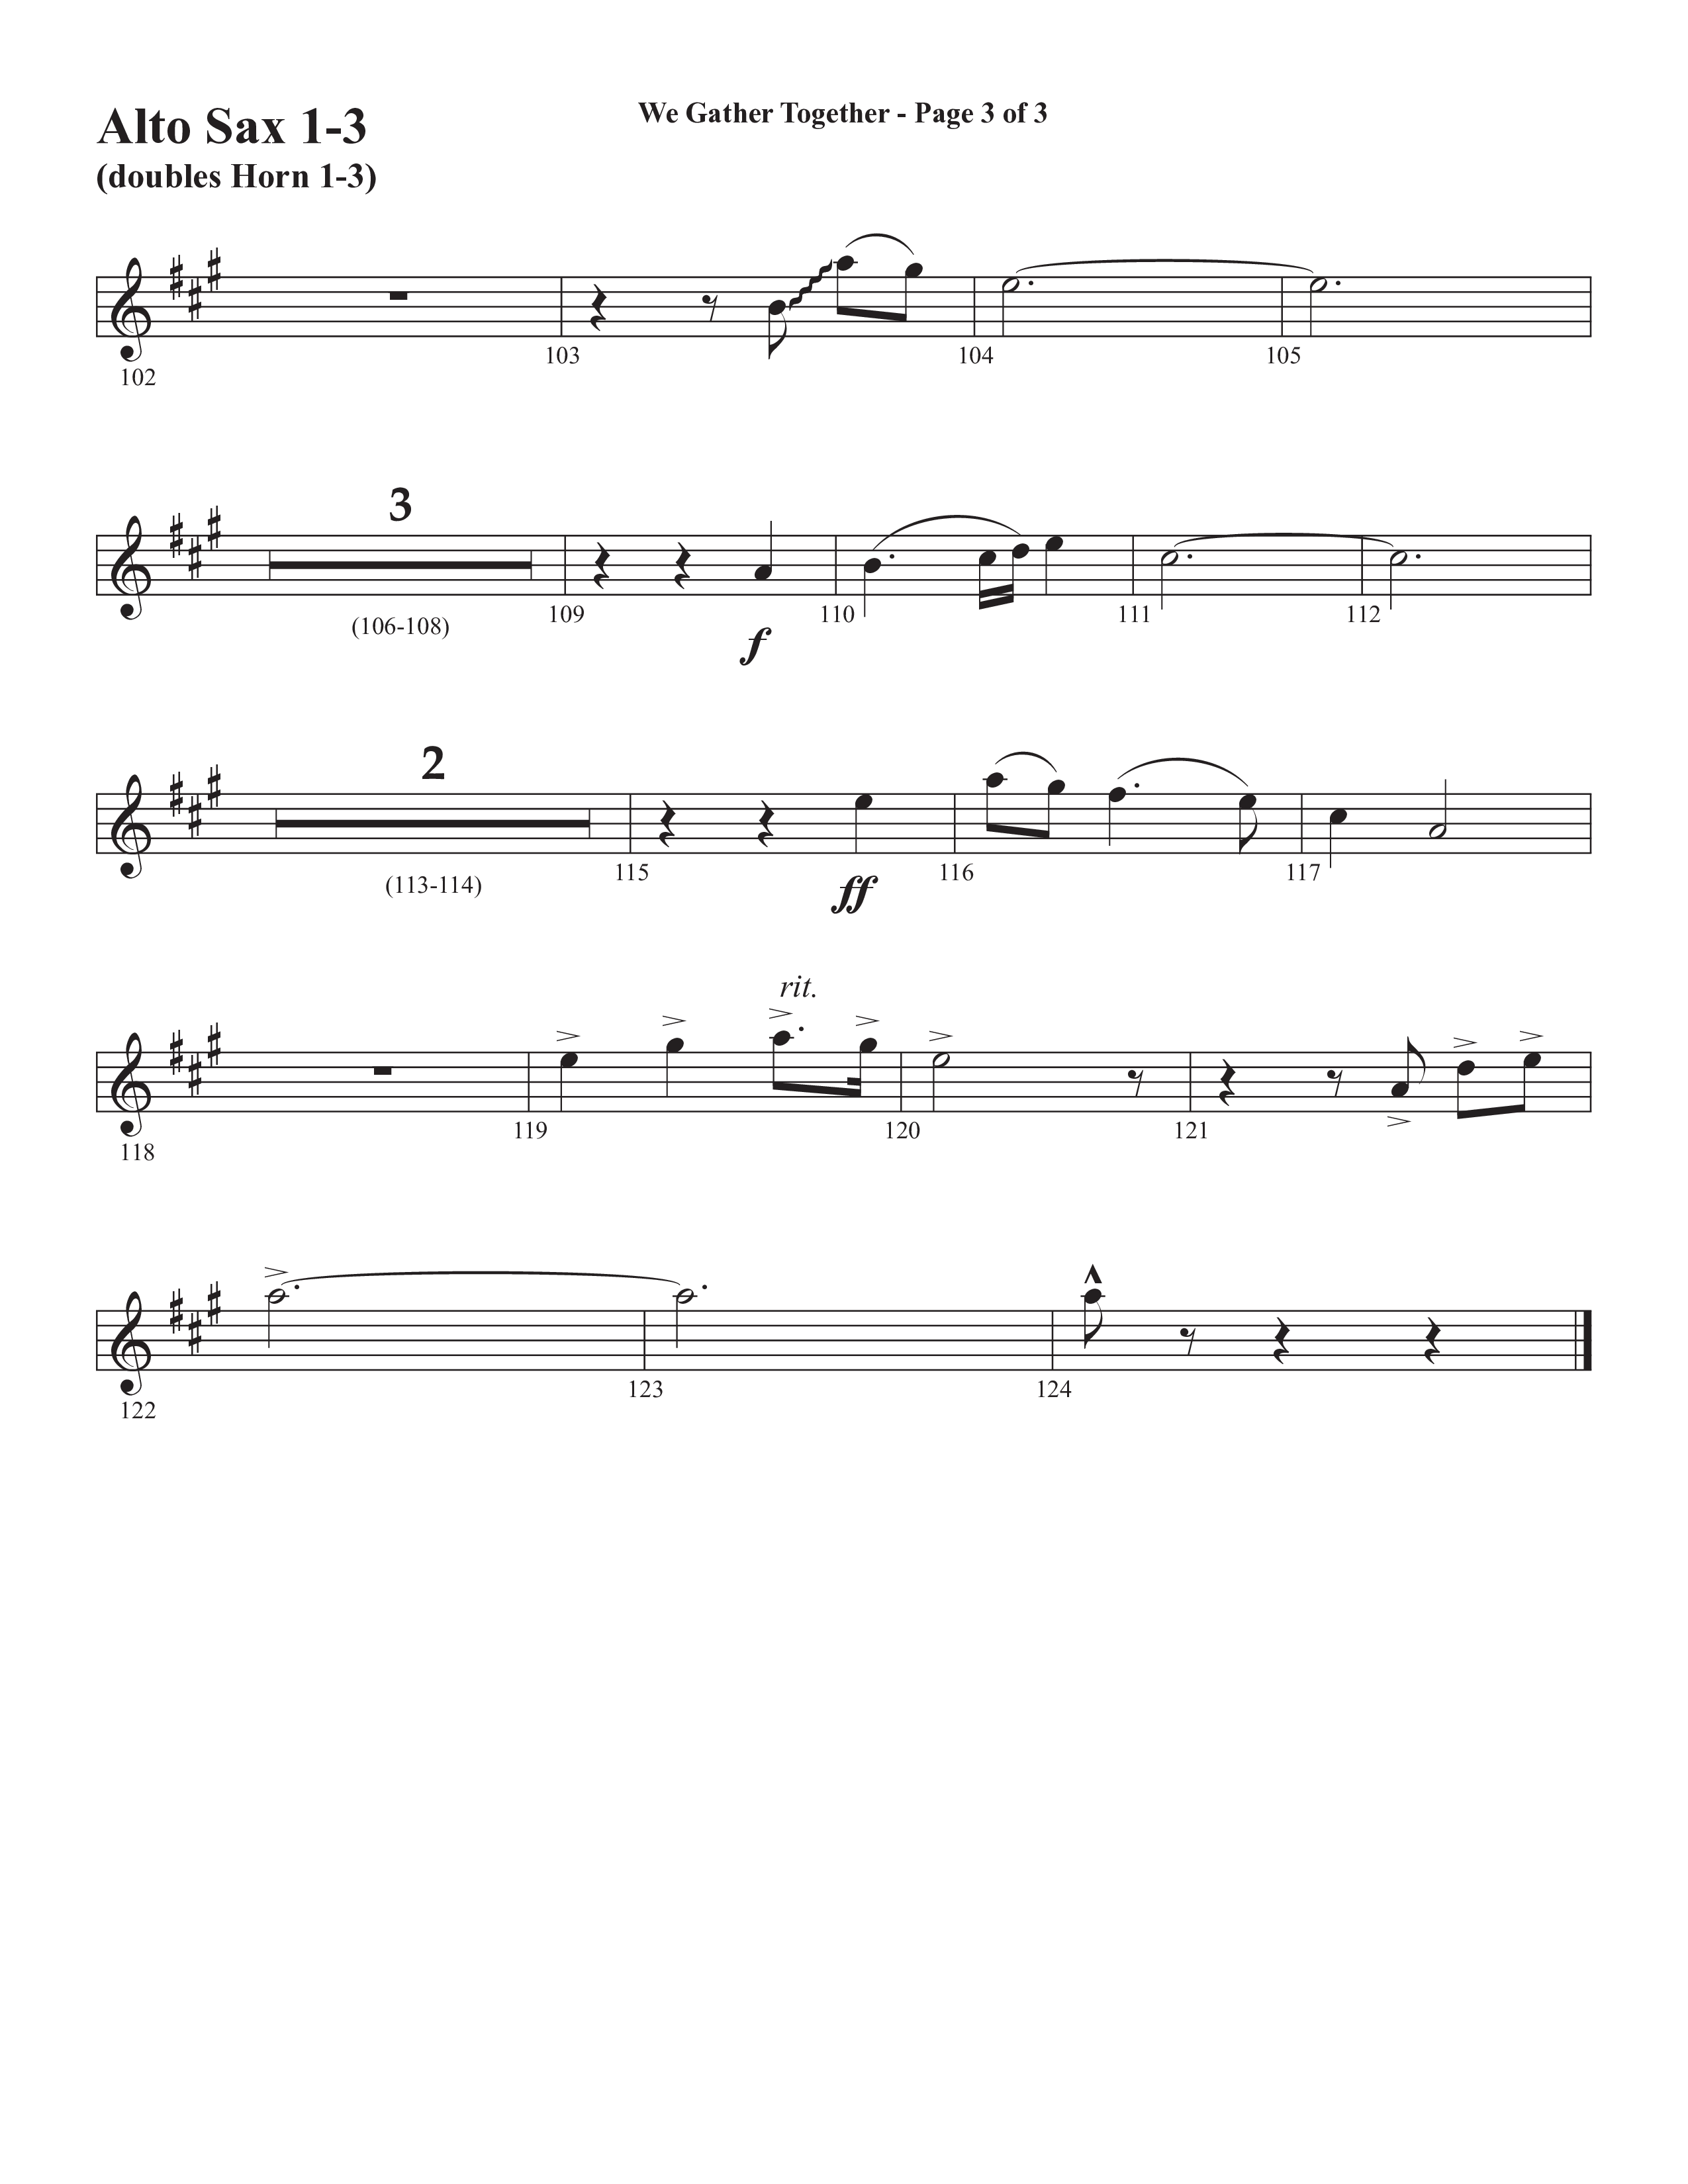 We Gather Together (We Thank You) (Choral Anthem SATB) Alto Sax (Semsen Music / Arr. John Bolin / Orch. Cliff Duren)